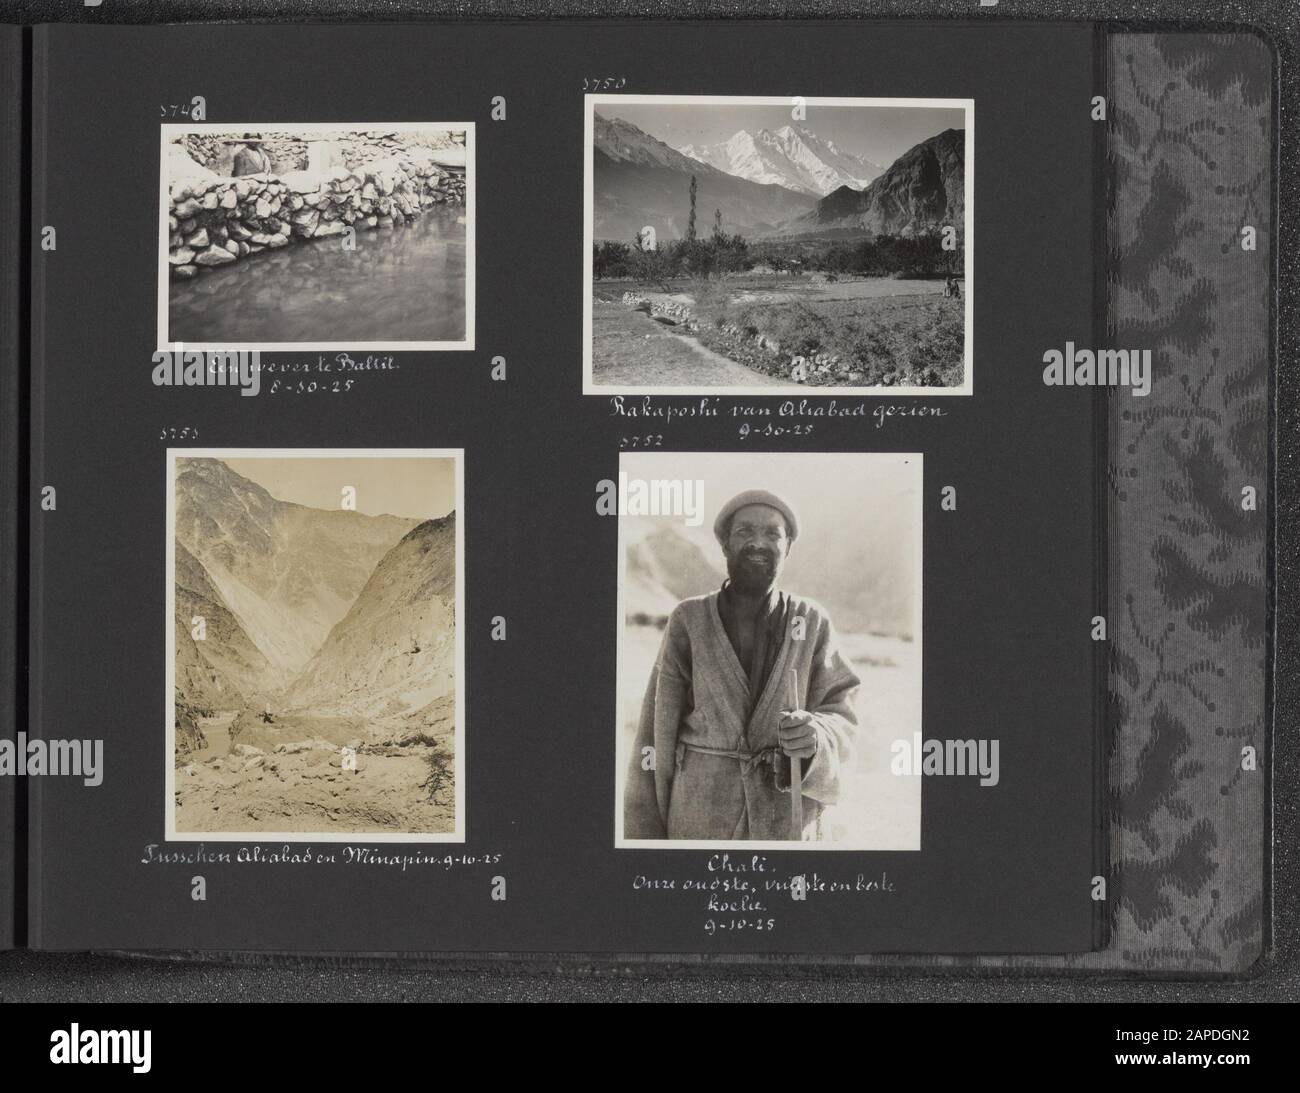 Photo Album Fisherman: Second Karakorum Expedition Description: Album sheet with four pictures. Top left: man with loom behind a wall in Baltit. Top right: the Rakaposhi seen from Aliabad. Bottom left: Hunza Valley between Aliabad and Minapin. Bottom right: the carrier Chali. Described by Visser here as the oldest, dirtiest and best cooly Annotation: The Rakaposhi is a 7788 m high mountain. The mountain was first climbed in 1958 by a Britian-Pakistani expedition Date: 1 January 1925 Location: Aliabad, Hunza-valley, Karakorum, Pakistan, Rakaposhi Keywords: carriers, expeditions, coolies, weavin Stock Photo